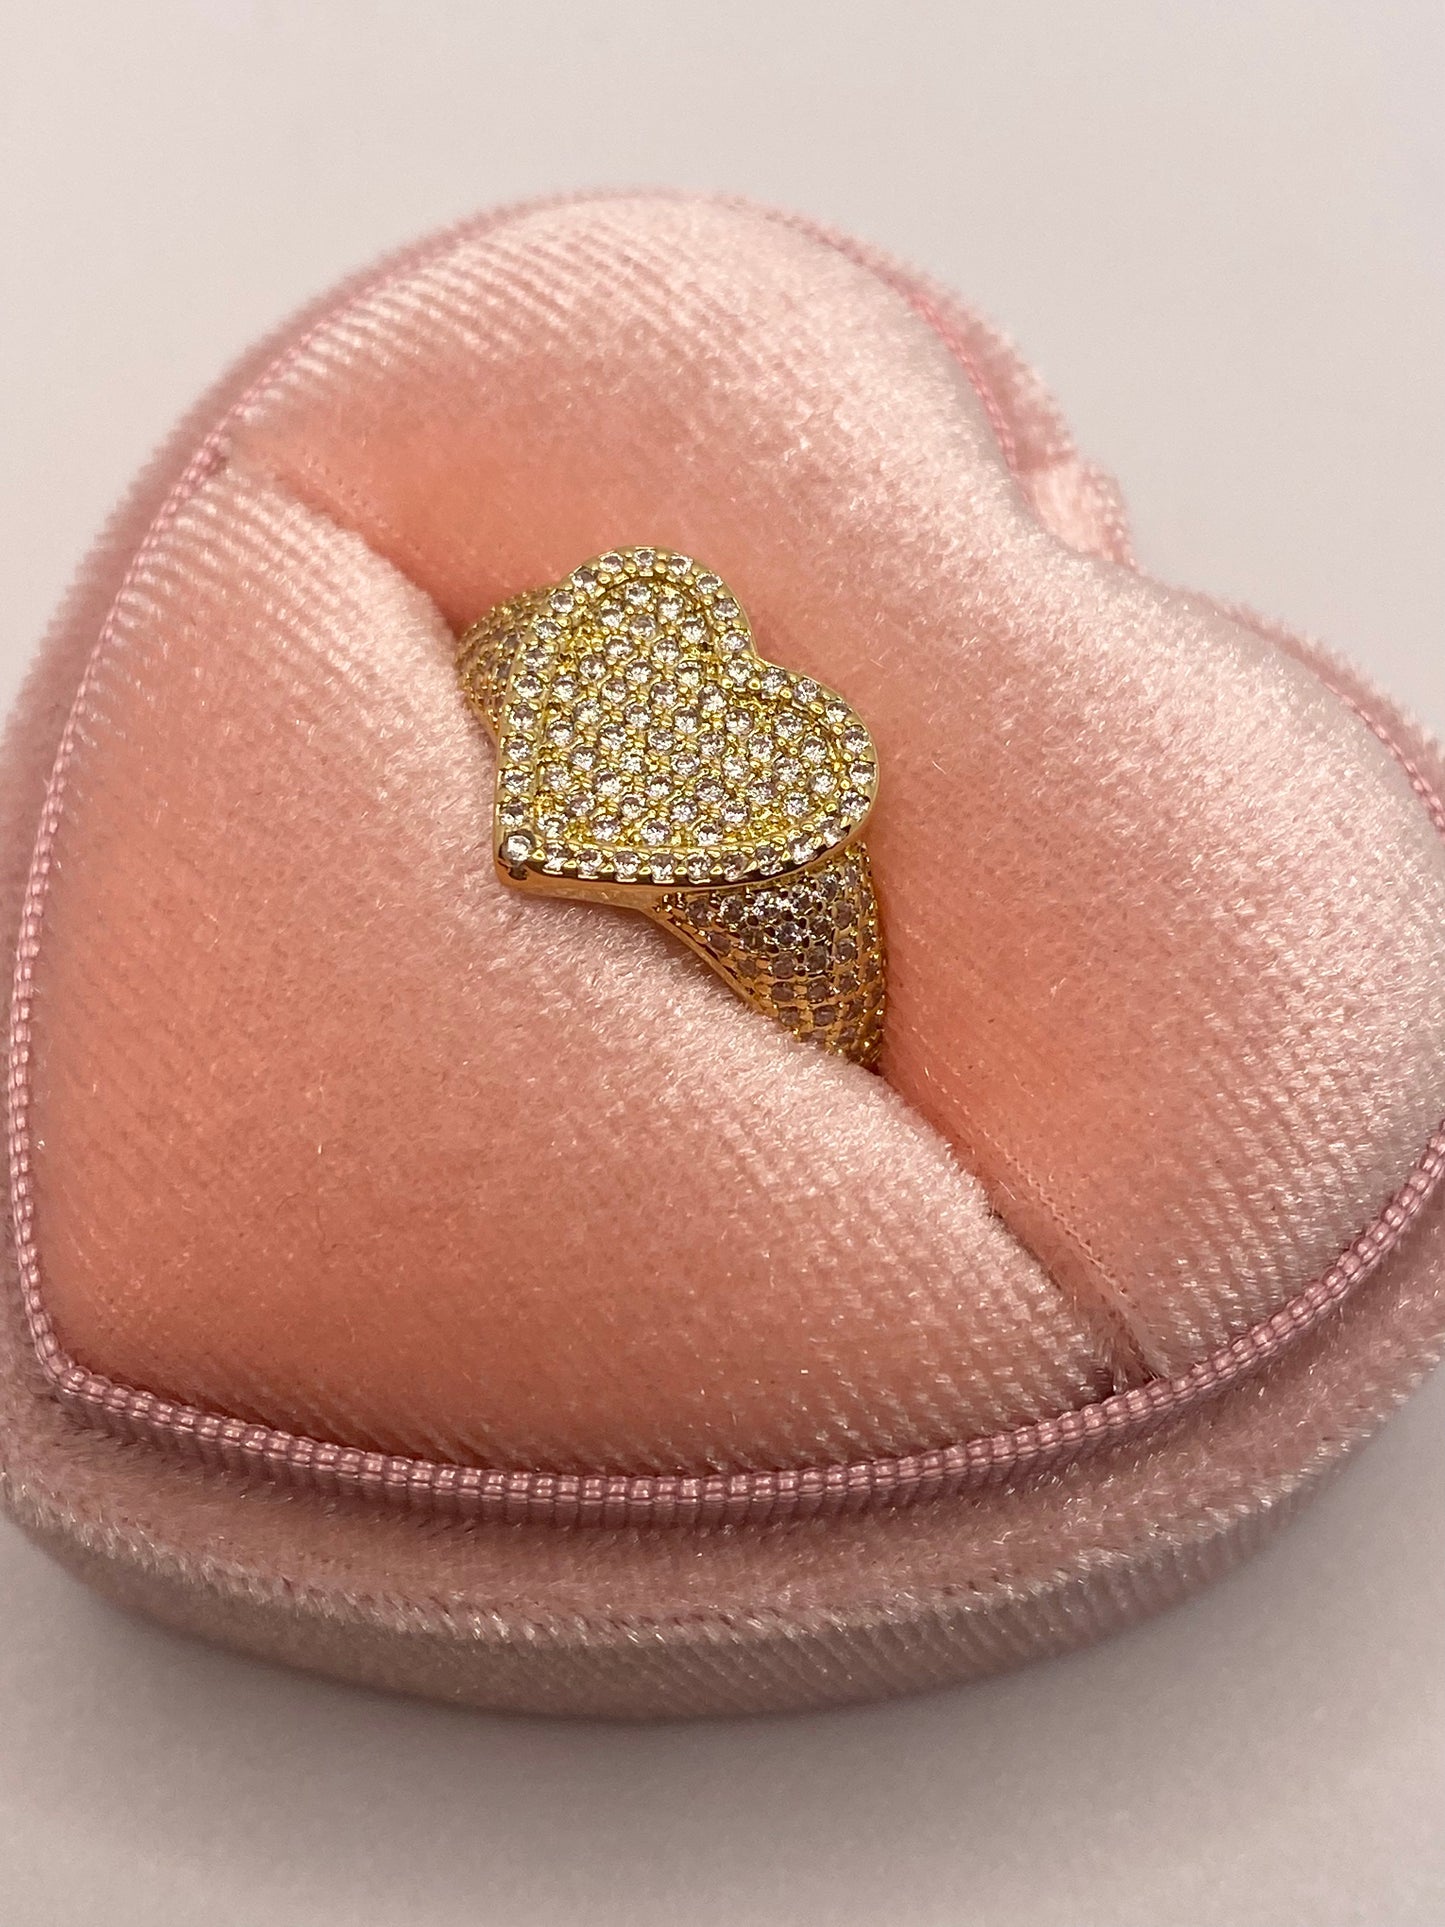 Gold Cold Heart Ring